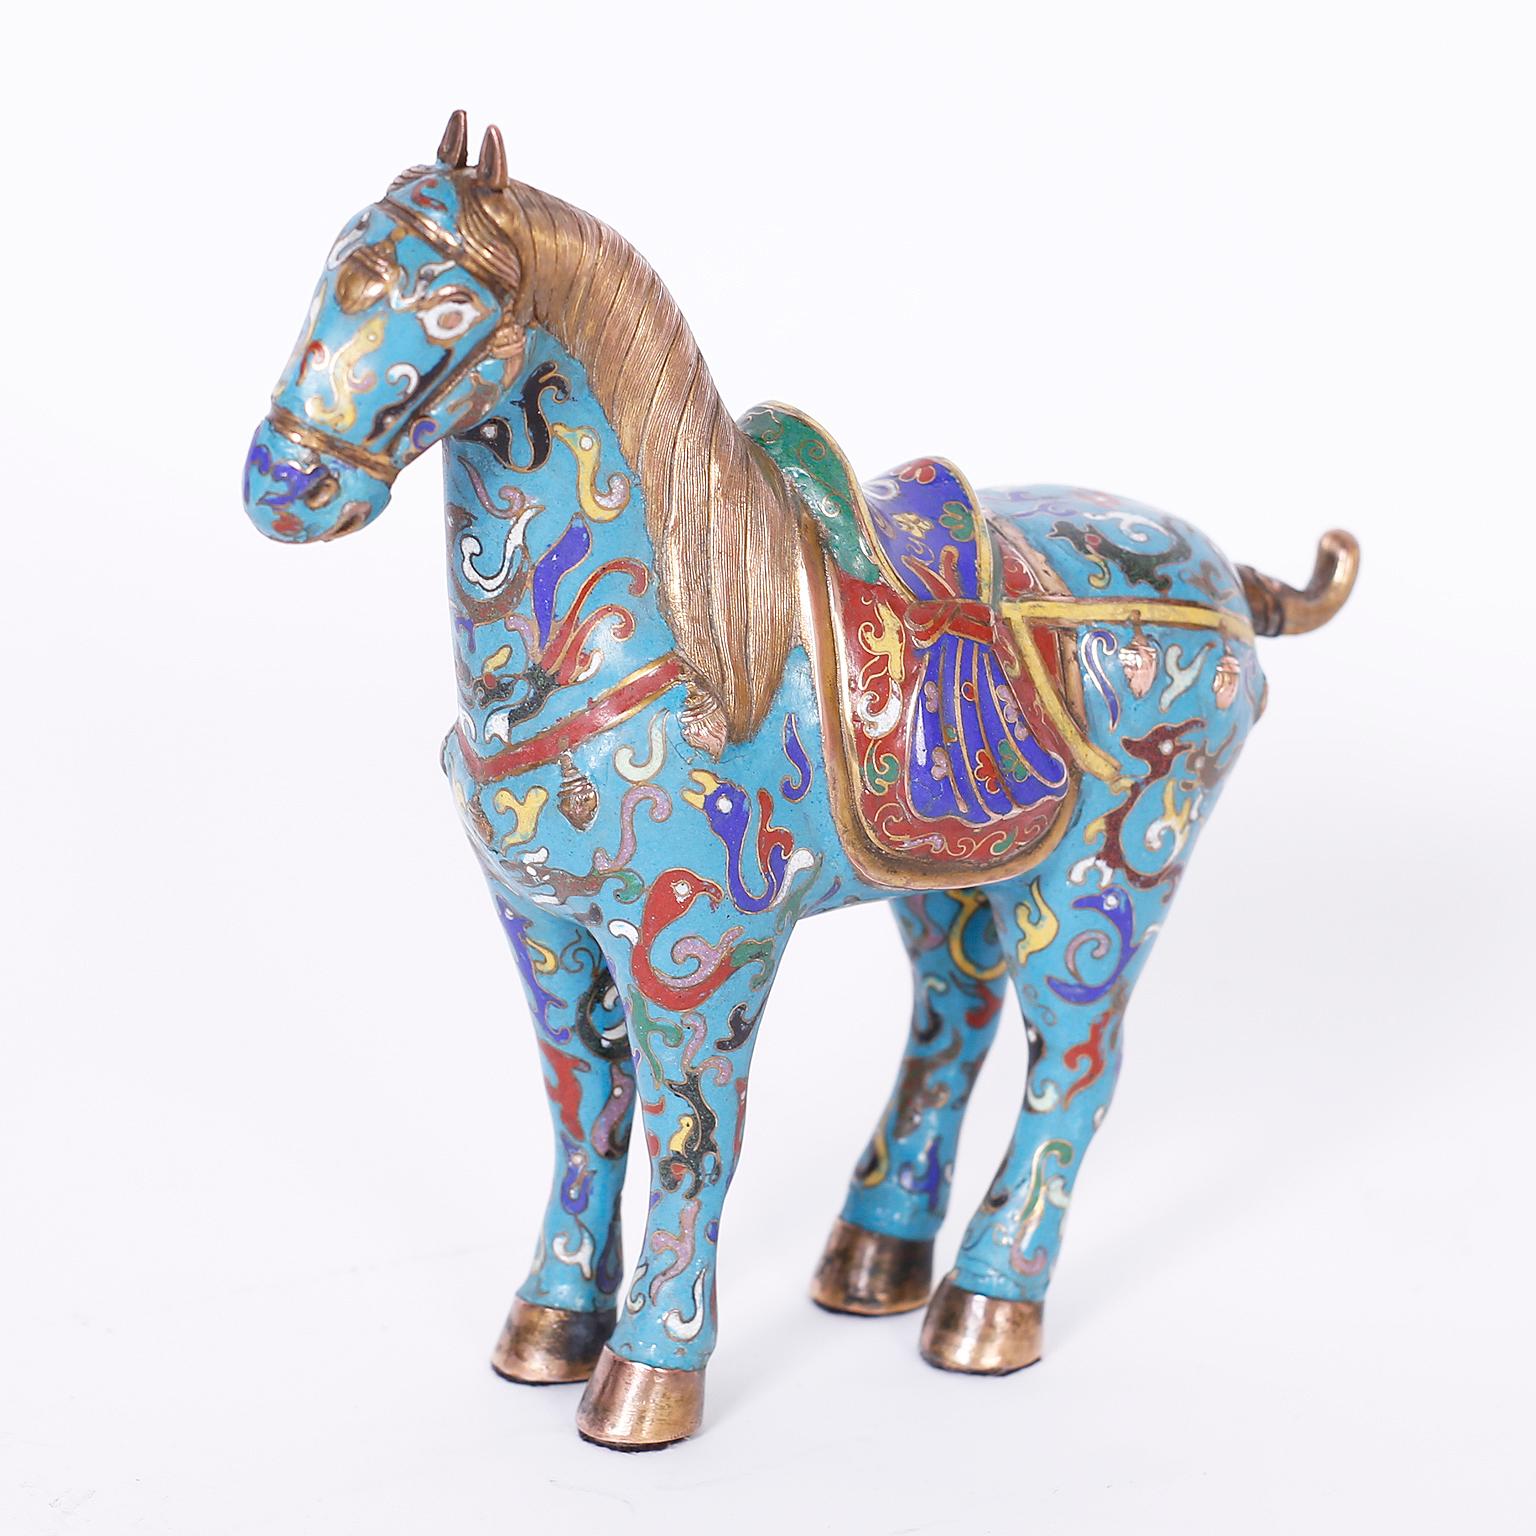 Pair of midcentury Chinese cloisonné or enamel on copper horses with colorful symbolic designs over a blue background with a strong reference to Tang dynasty.